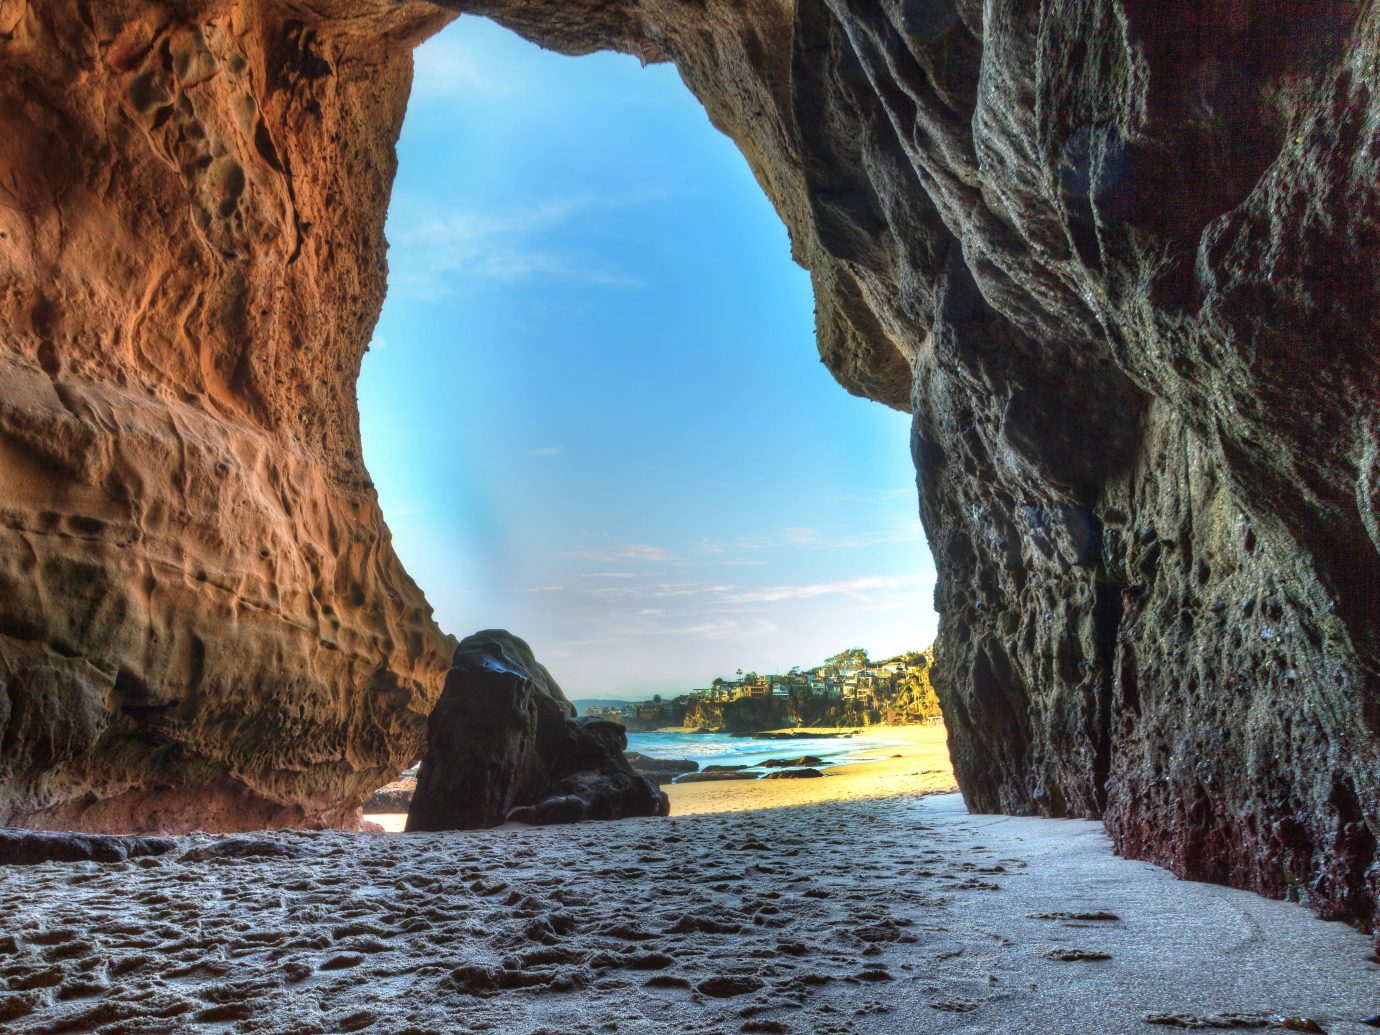 Opening of a cave at One Thousand Steps Beach in Laguna Beach, California, USA